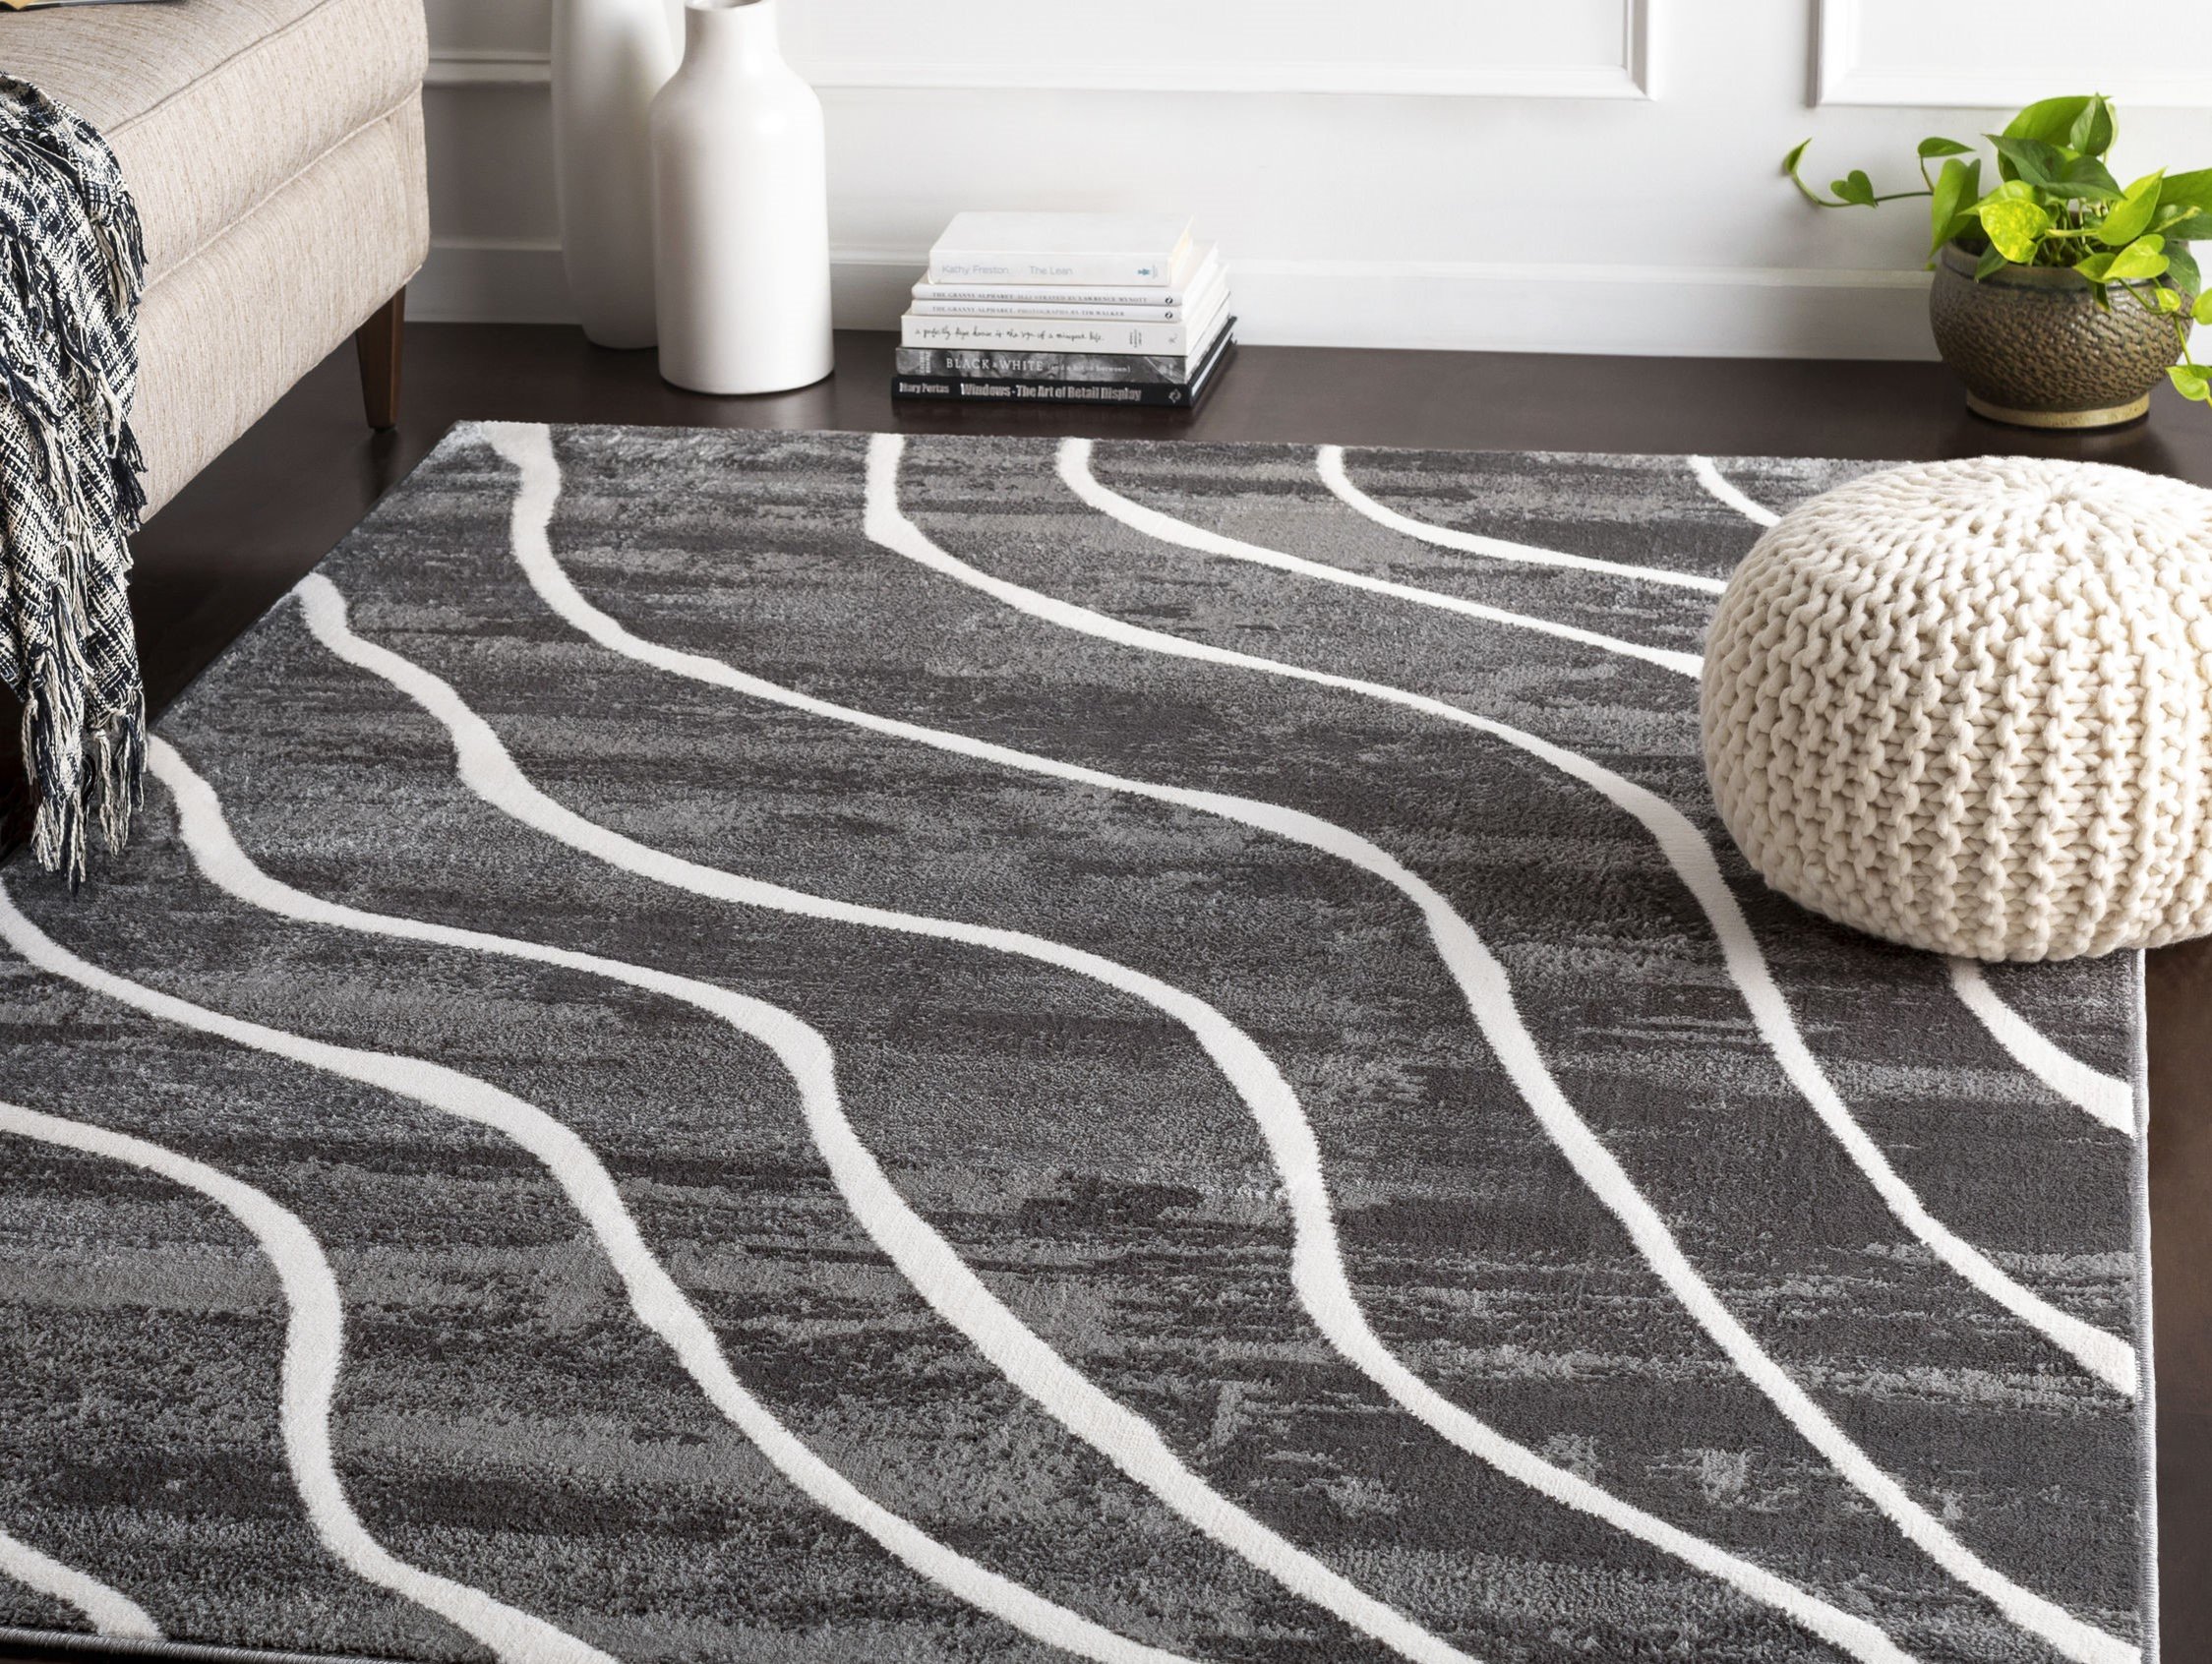 Here's How to Waterproof a Rug (It's Easier Than You Think